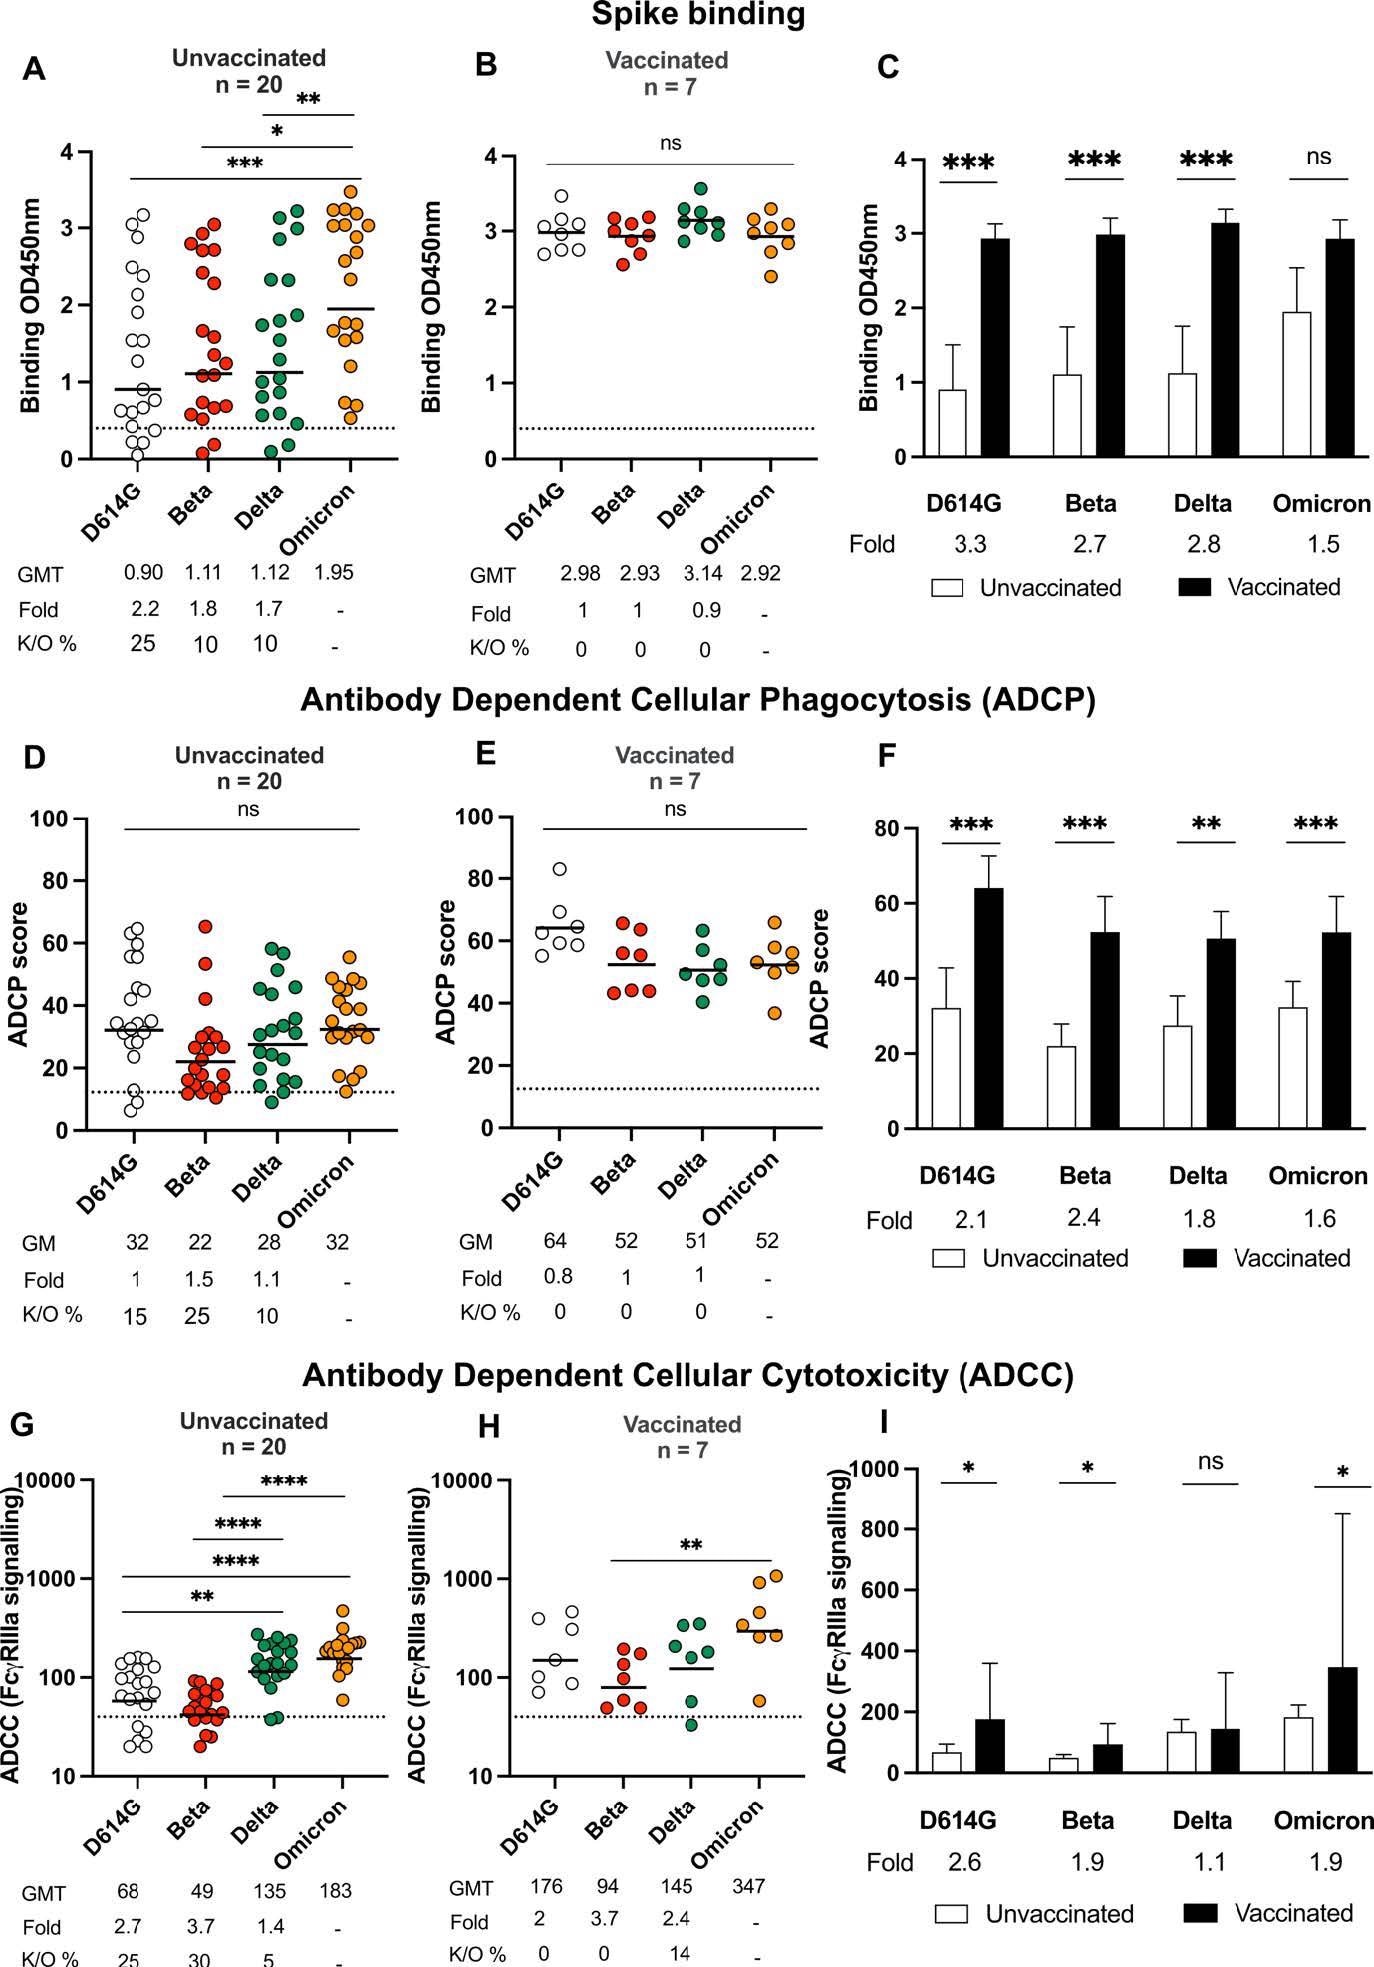 Binding and Fc effector function elicited by Omicron infection is crossreactive against several variants of concern Antibody binding measured by ELISA in (A) unvaccinated individuals (n =20) or (B) individuals vaccinated with either one dose of Ad26.CoV.2S or two doses of BNT162b2 (n=7) and infected by Omicron against D614G, Beta, Delta and Omicron spike proteins. (C) Bars show geometric mean binding titers for vaccinated (black) and unvaccinated (white) individuals against variants of concern. Antibody-dependent cellular phagocytosis (ADCP) of (D) unvaccinated and (E) vaccinated individuals is represented as the percentage of monocytic cells that take up spike coated beads (D614G, Beta, Delta and Omicron) multiplied by their geometric mean fluorescence intensity (MFI). (F) Bars show geometric mean ADCP scores for vaccinated (black) and unvaccinated (white) individuals against variants of concern. Antibody-dependent cellular cytotoxicity (ADCC) in (G) unvaccinated and (H) vaccinated individuals shown as relative light units (RLU) signaling through FcgRIIIa expressing cells. (I) Bars show geometric mean activity for vaccinated (black) and unvaccinated (white) individuals against variants of concern. All data are representative of two independent experiments. For dot plots, lines indicate geometric mean titer (GMT) also represented below the plot with fold decrease and knock-out (K/O) of activity for other variants as a percentage relative to Omicron. Dotted lines indicate the limit of detection of the particular assay. For bar charts, bars indicate median of function, with error bars showing standard deviations with fold decreases relative to vaccinated individuals, indicated below the plot. Statistical significance across variants is shown by Friedman test with Dunn’s correction and between vaccinated and unvaccinated samples by the Mann Whitney test. *p<0.05; **p<0.01; ***p<0.001; ****p<0.0001 and ns = non-significant.